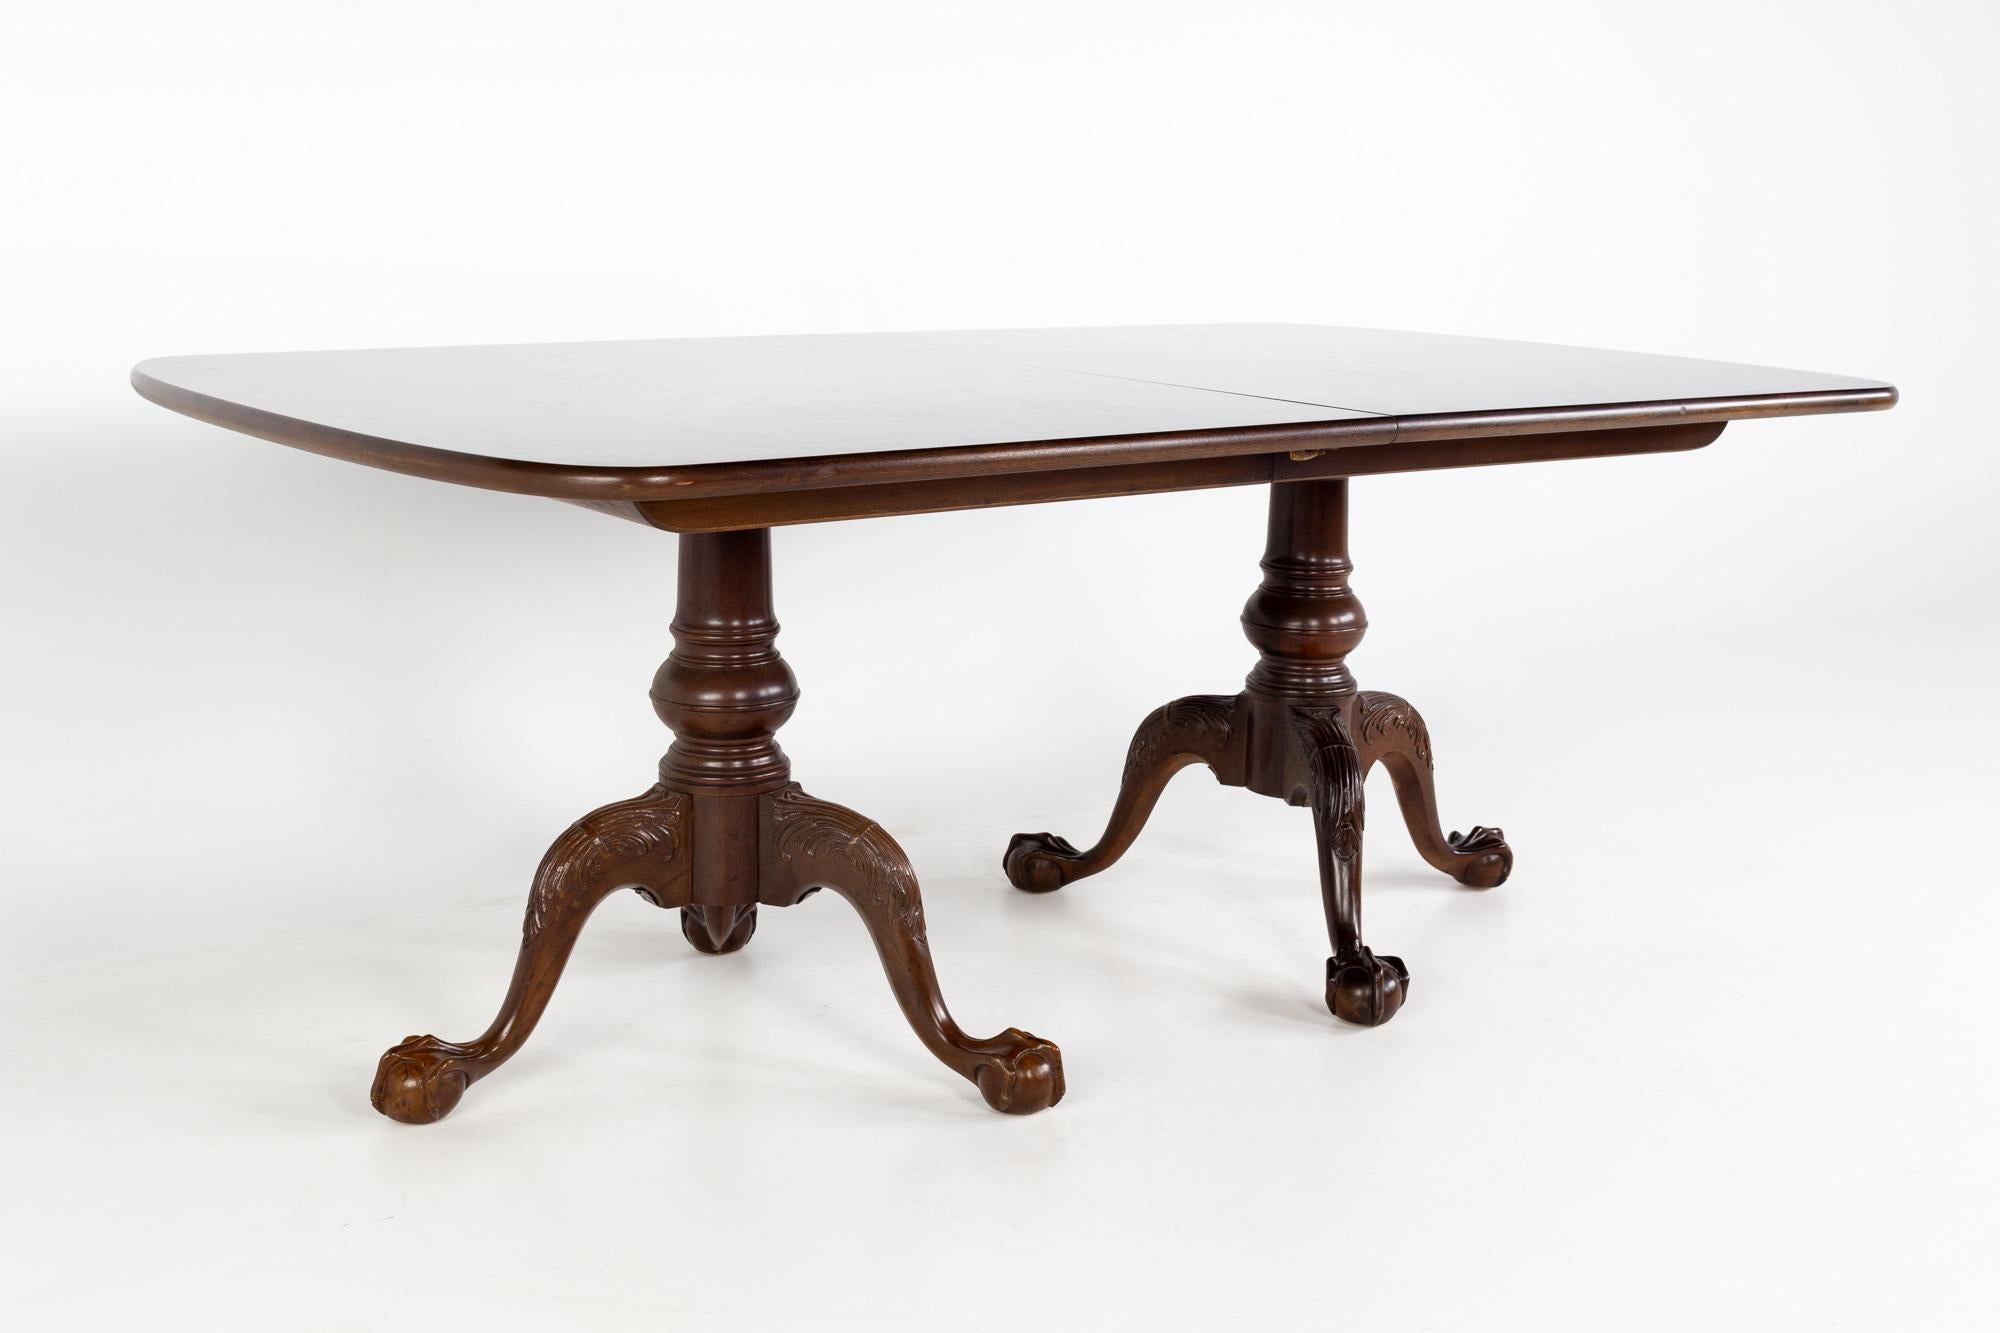 Henredon aston court mahogany dining table with 2 leaves

This table measures: 76 wide x 46 deep x 30 high, with a chair clearance of 28 inches. Measurements for the leaves are pending at this time.

This piece is in great vintage condition with